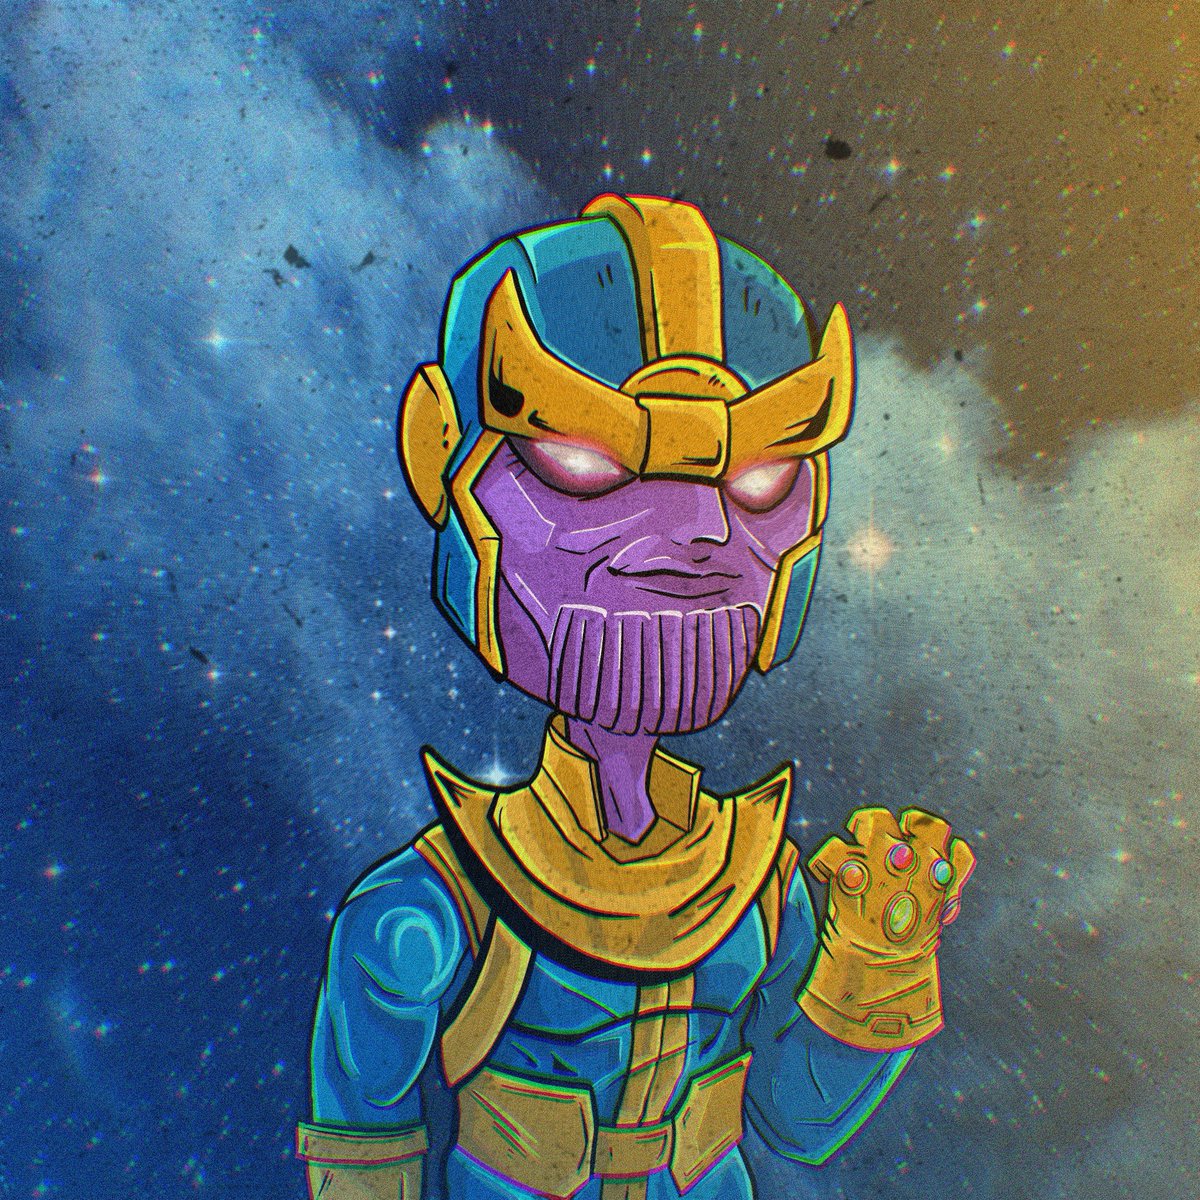 🚩 sold 
Thanos has been collected by: @jpg_prince 
Thank you so much the support fam 🔥🔥

3 nobodies left let's go 🤟🏻
#XRPArmy